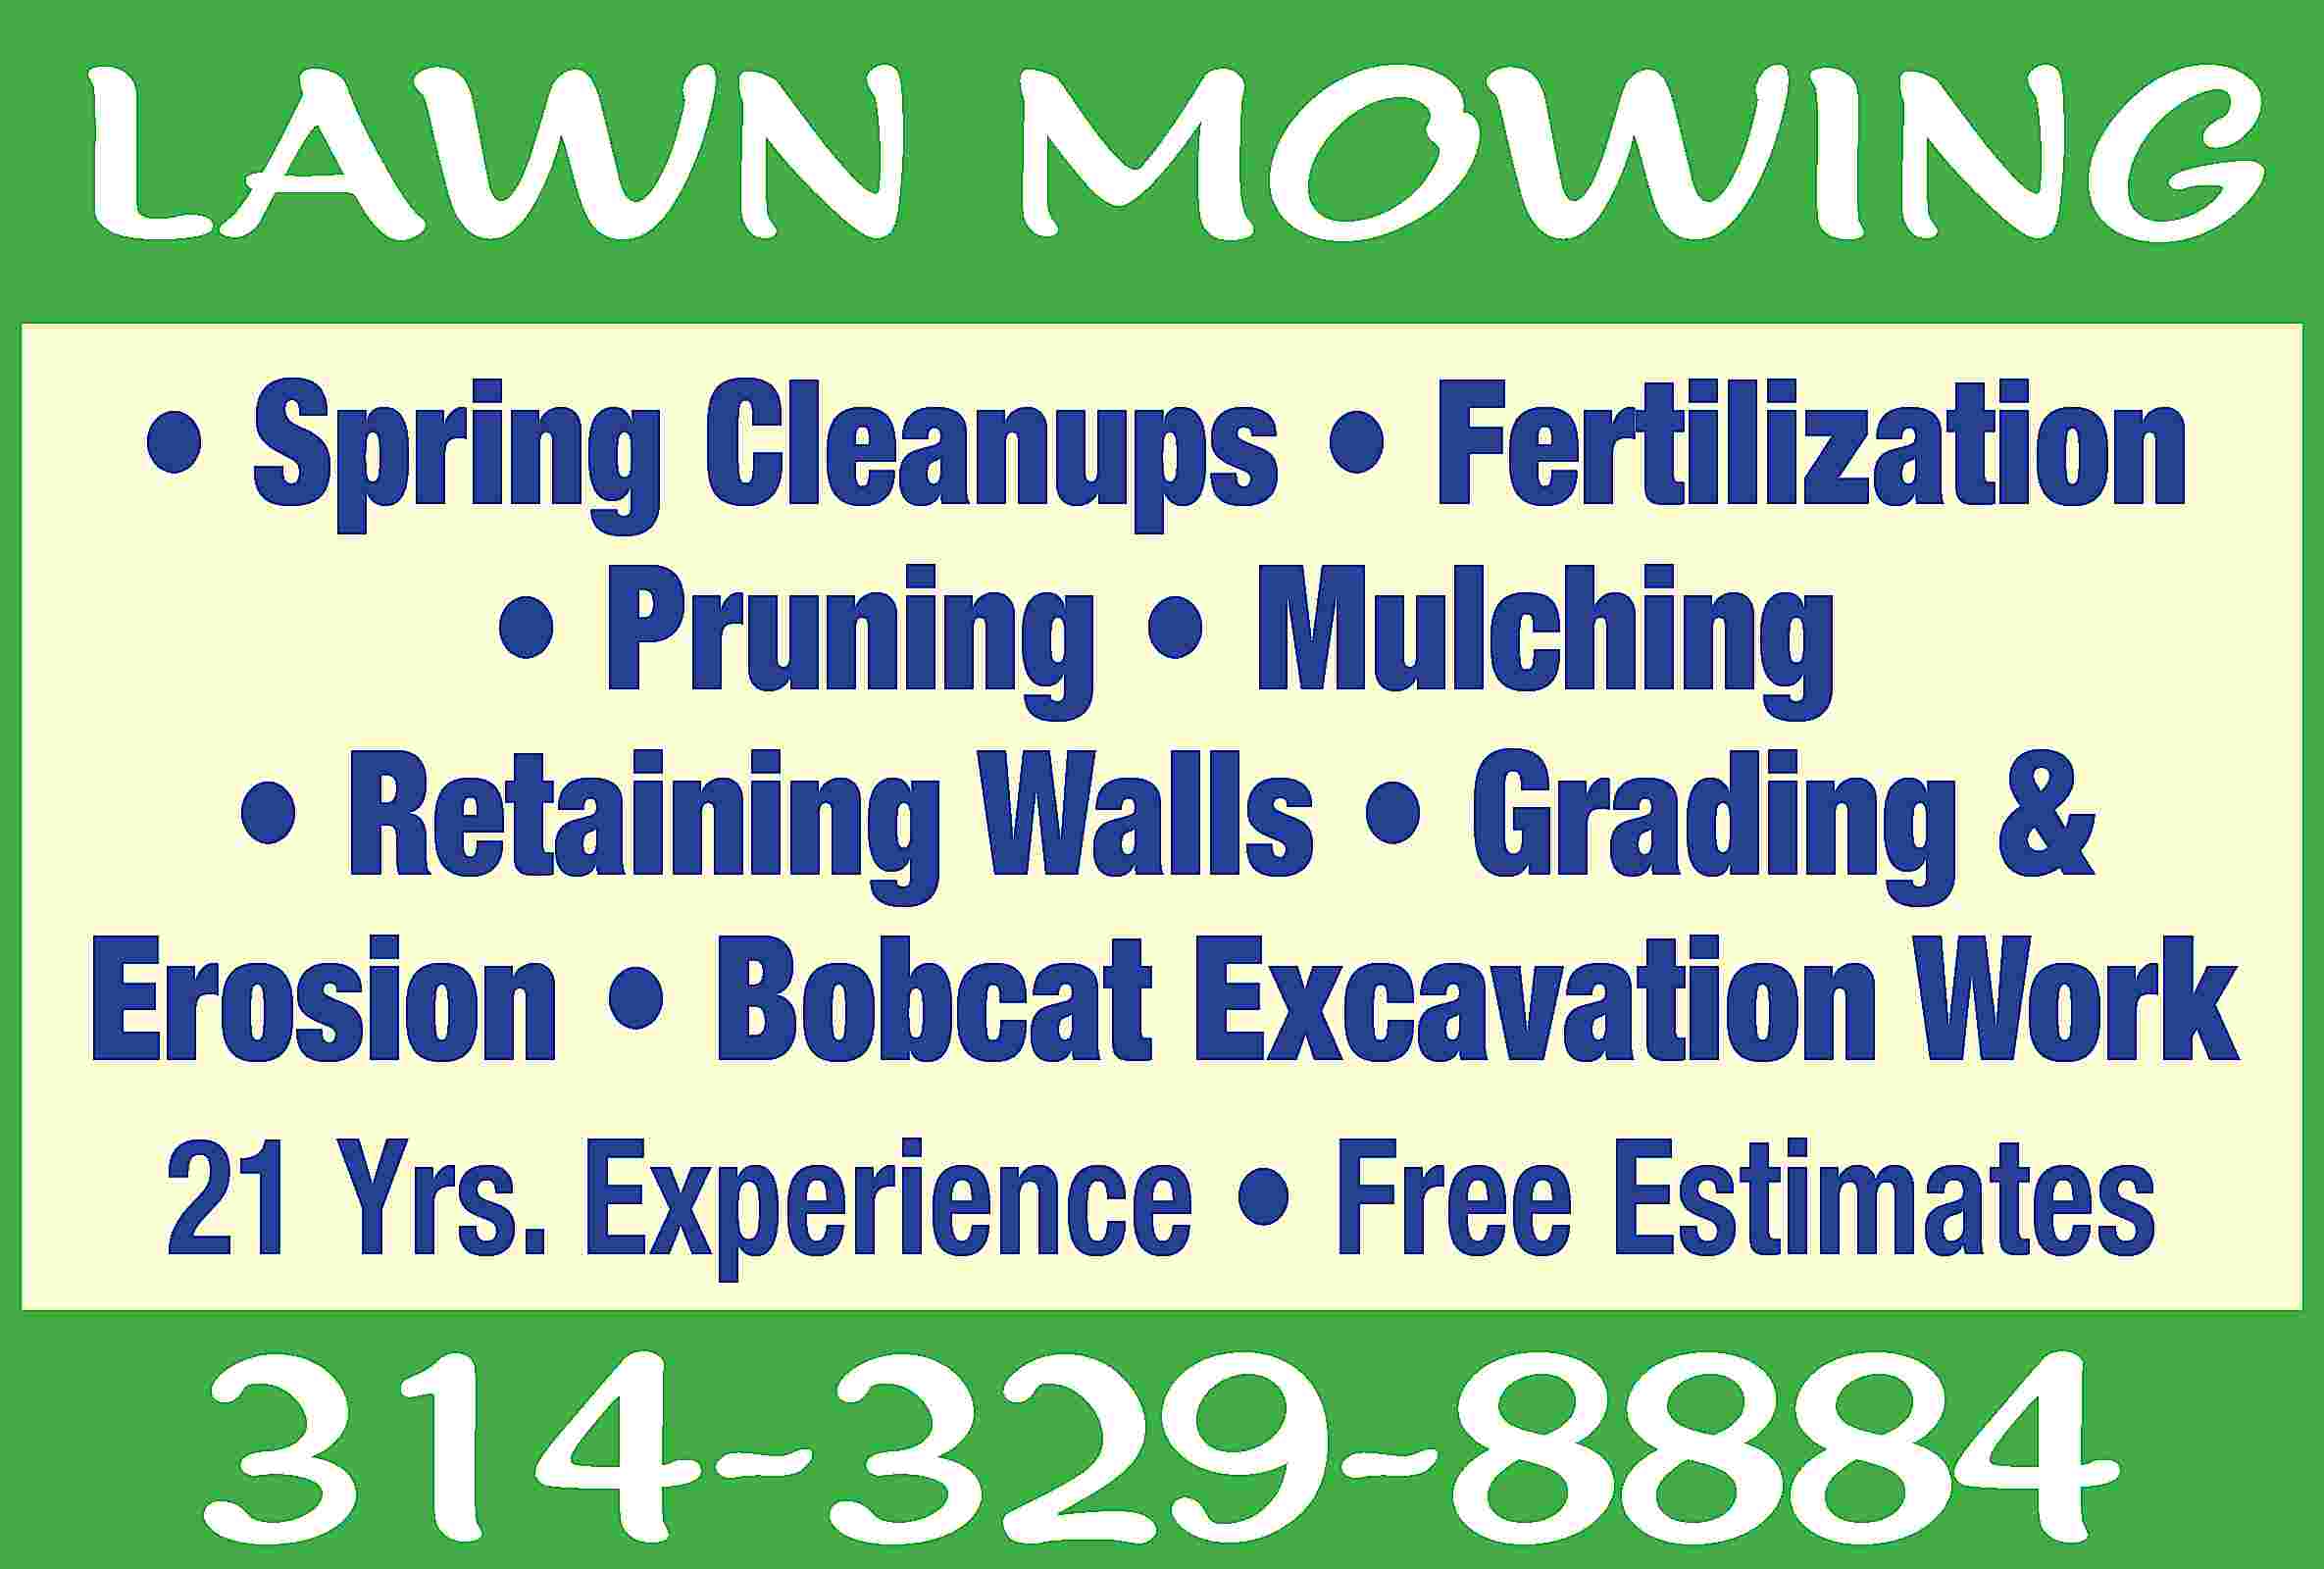 LAWN MOWING • Spring Cleanups  LAWN MOWING • Spring Cleanups • Fertilization • Pruning • Mulching • Retaining Walls • Grading & Erosion • Bobcat Excavation Work 21 Yrs. Experience • Free Estimates 314-329-8884